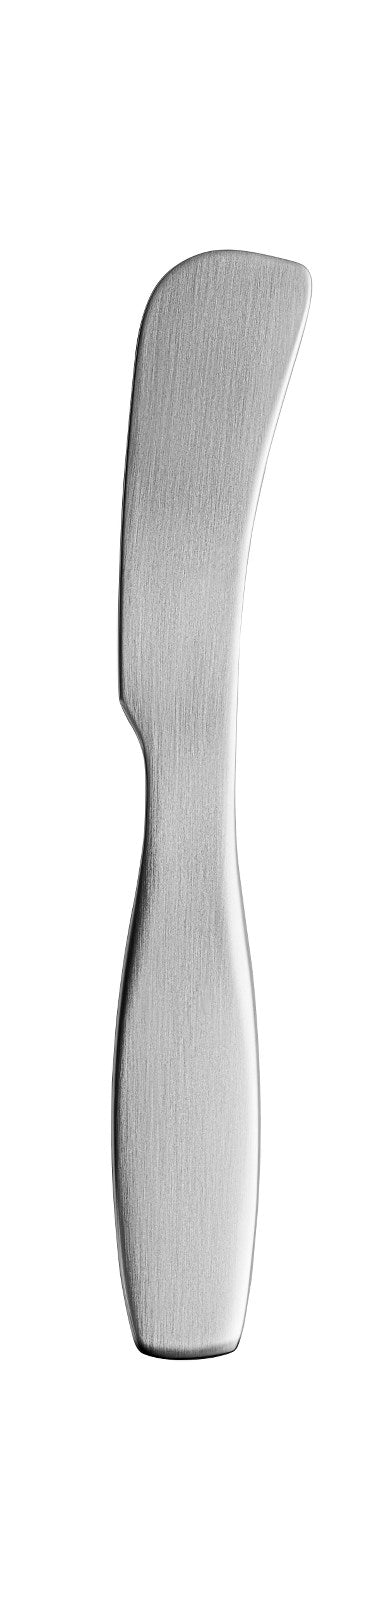 product image for Collective Tools Flatware design by Antonio Citterio for Iittala 91